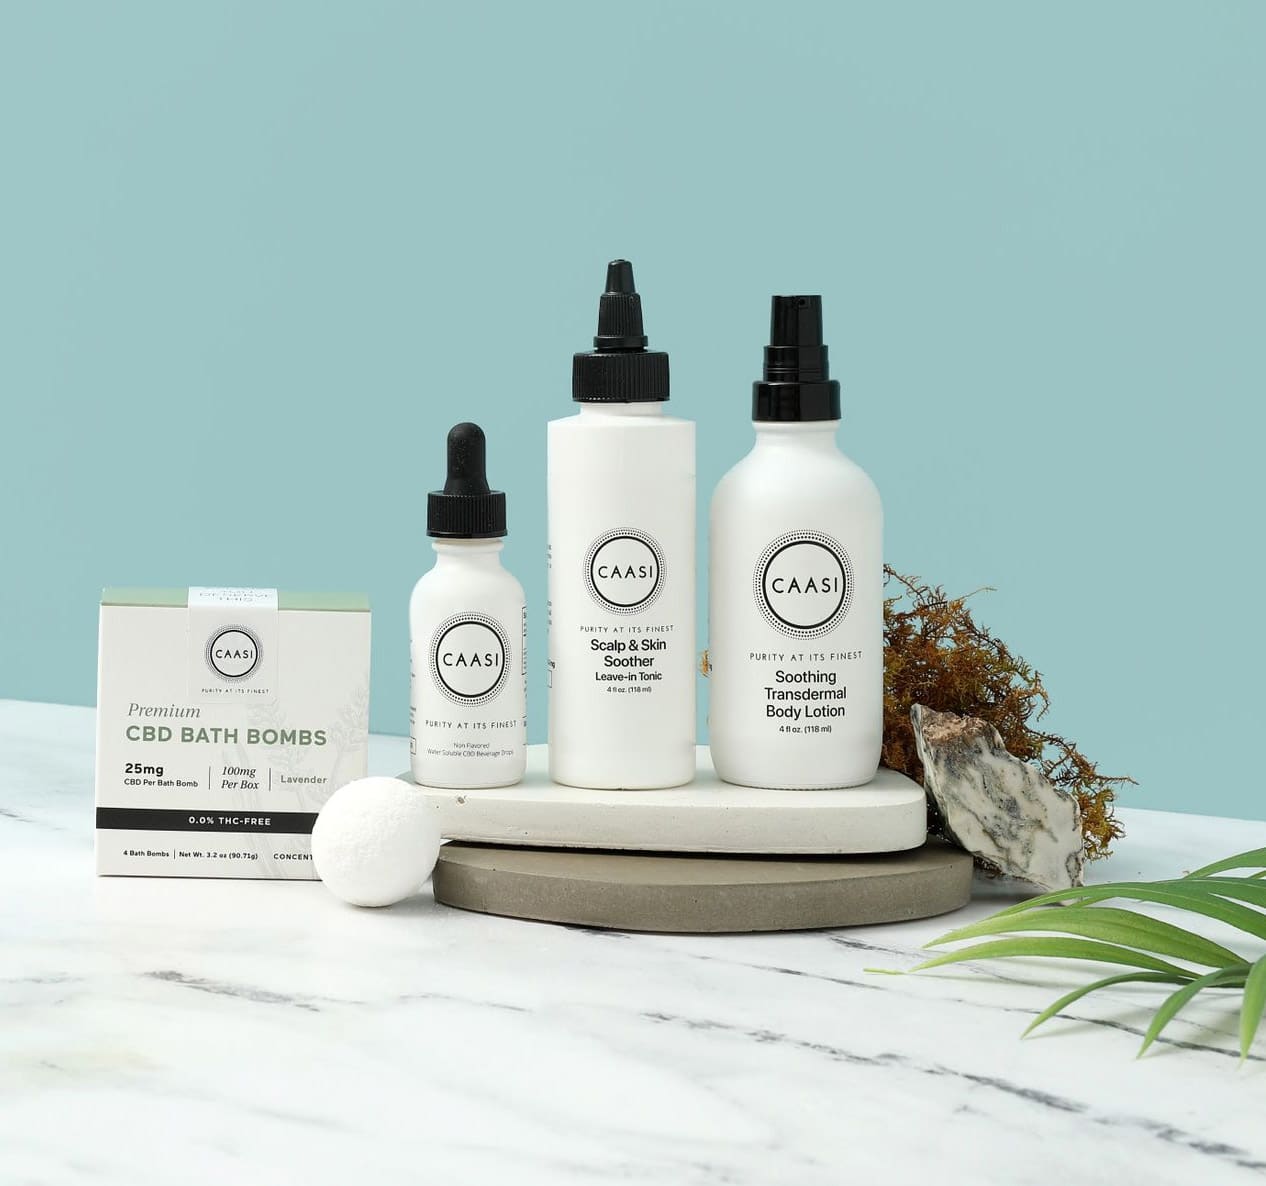 CAASI CBD products including CBD Bath Bombs, Water-Soluble Drops, Scalp & Skin Soother, and Soothing Transdermal Body Lotion.